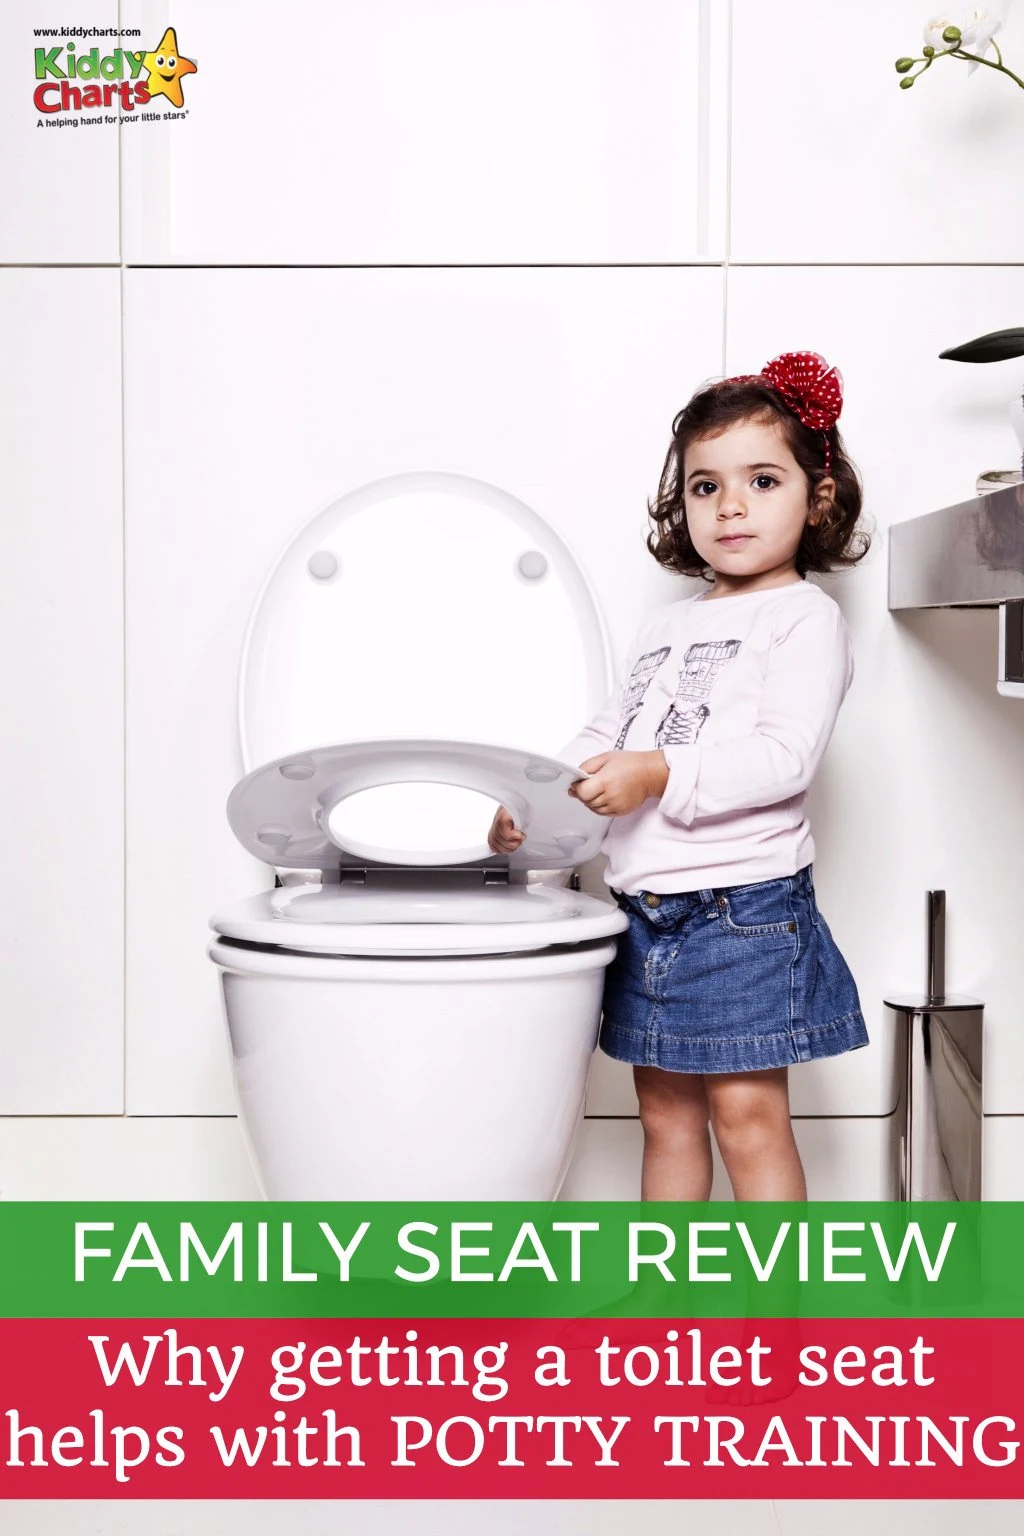 So gettting a toilet seat seems strange to help with potty training - right? WRONG. The Family Seat is great potty training help and we tell you why!